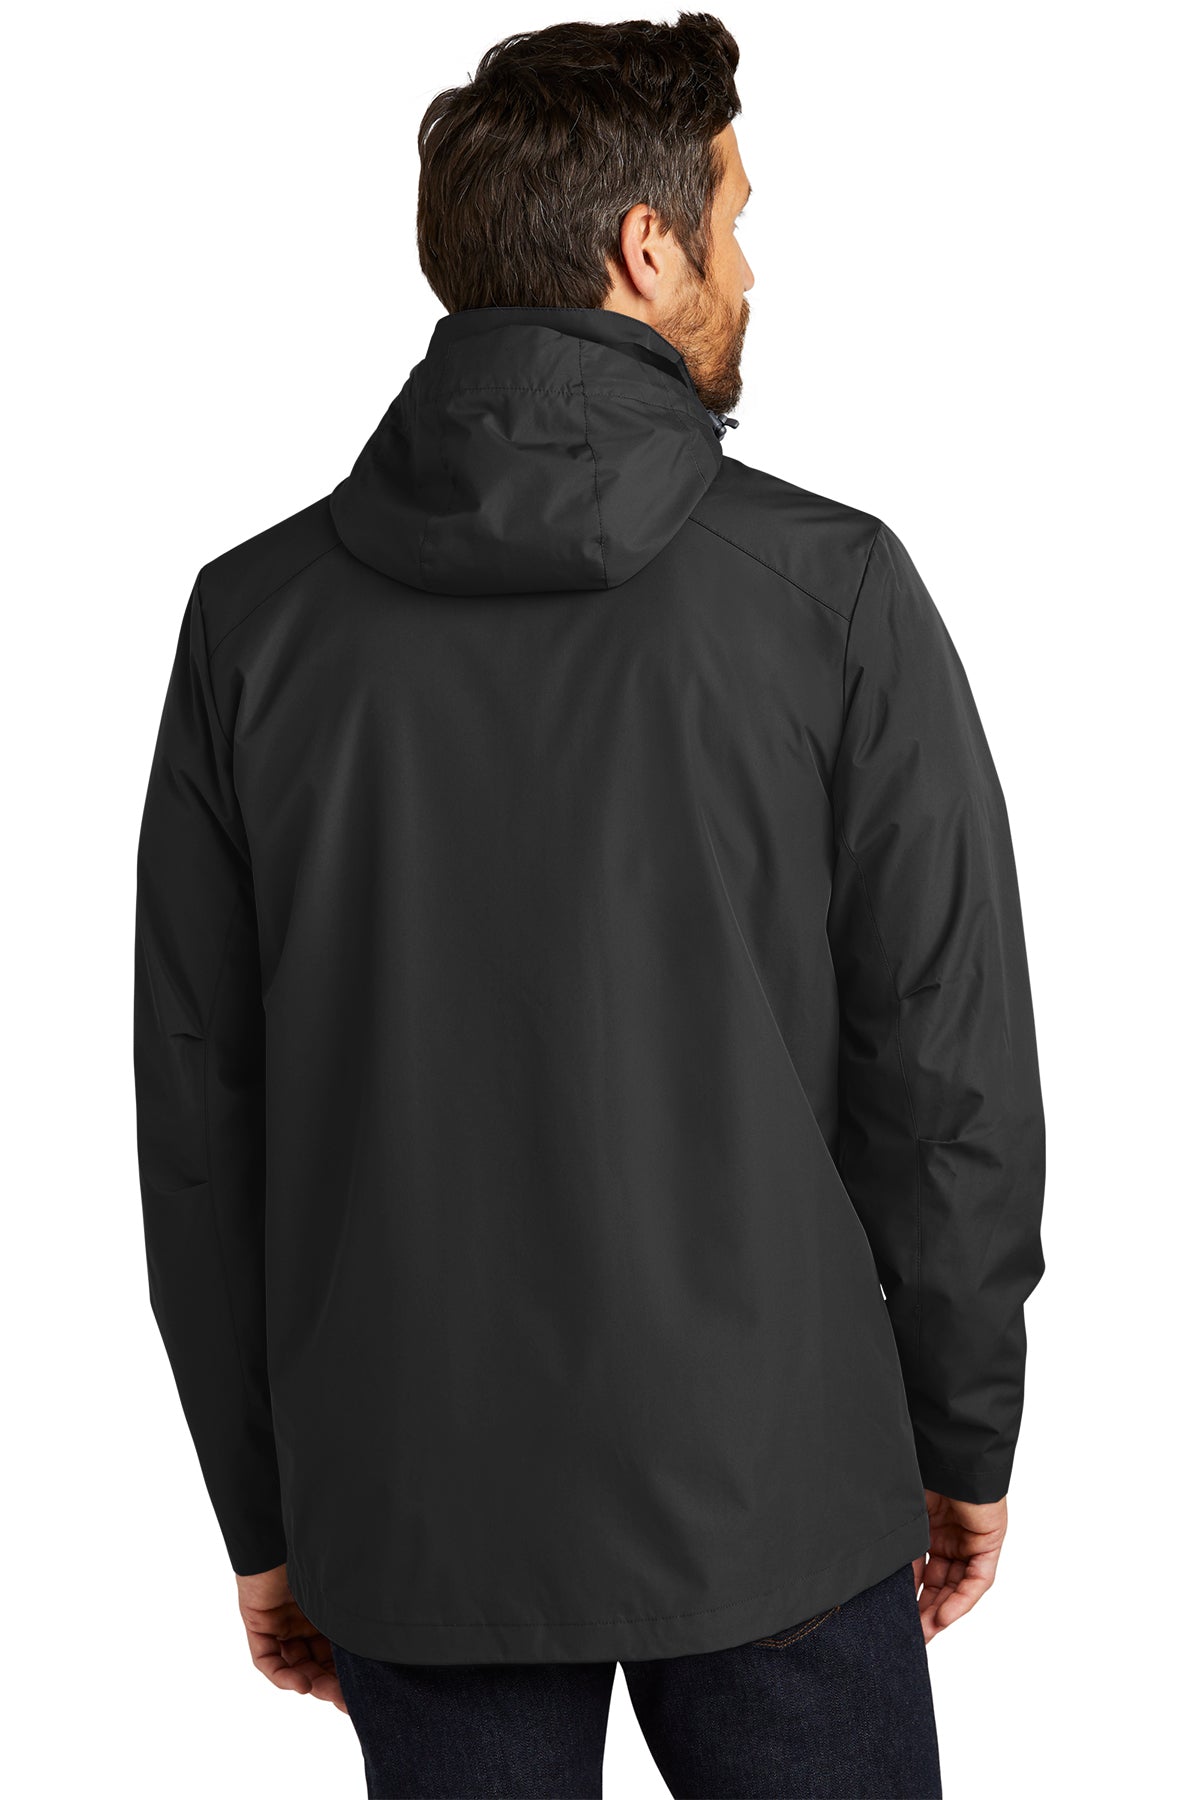 Port Authority All-Weather 3-in-1 Customized Jackets, Black